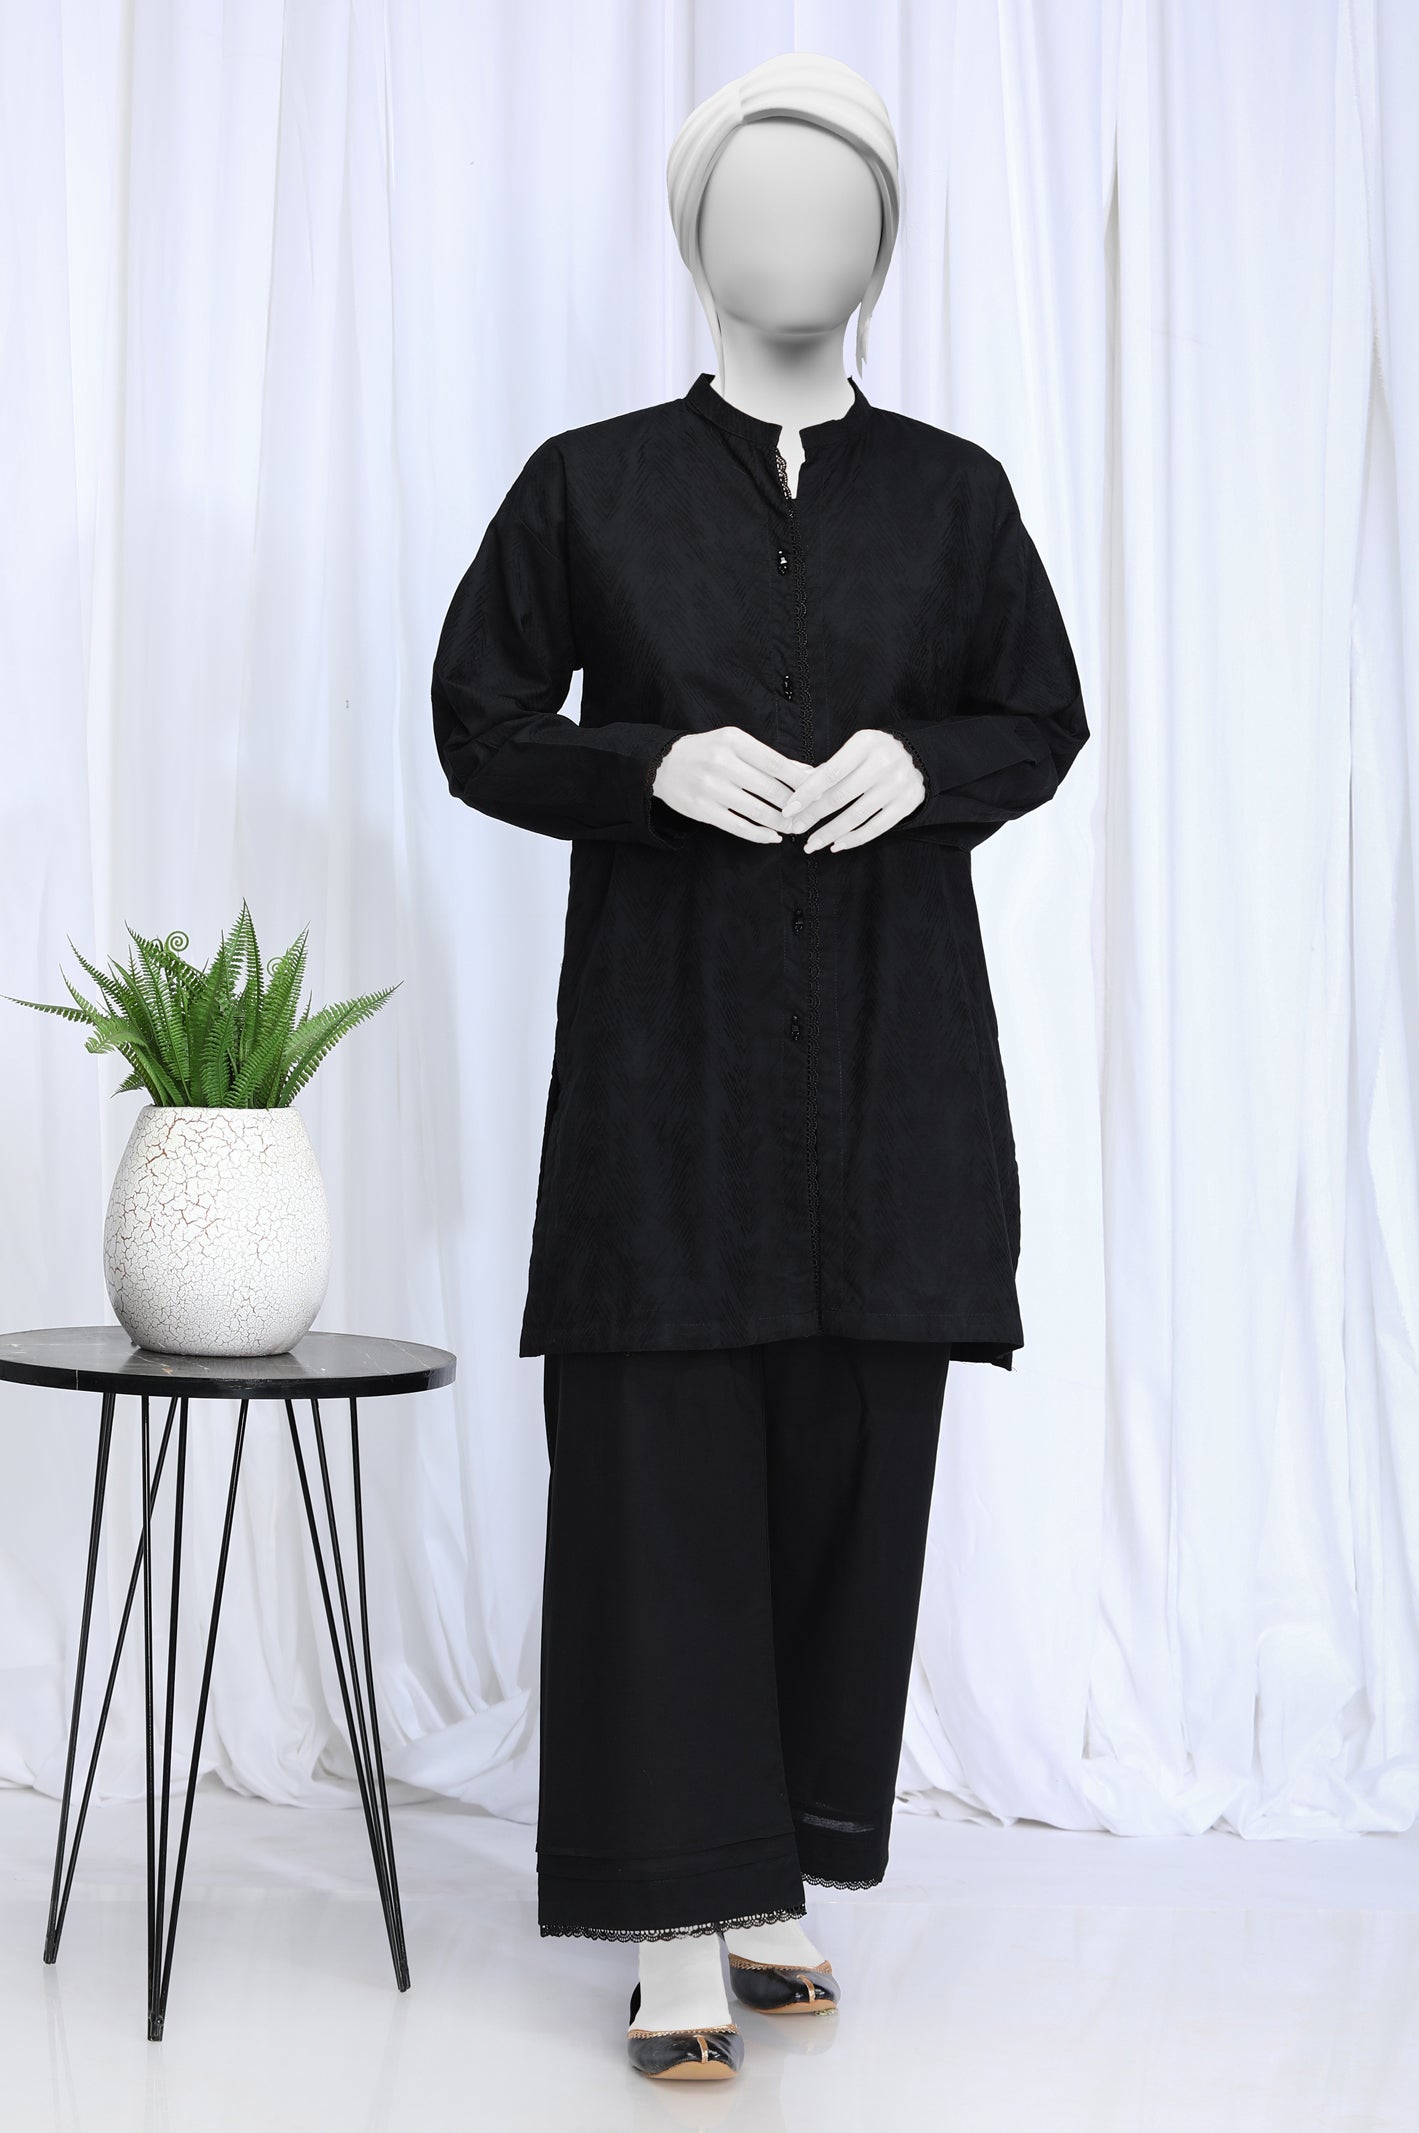 2PC Jacquard Black Suit From Diners